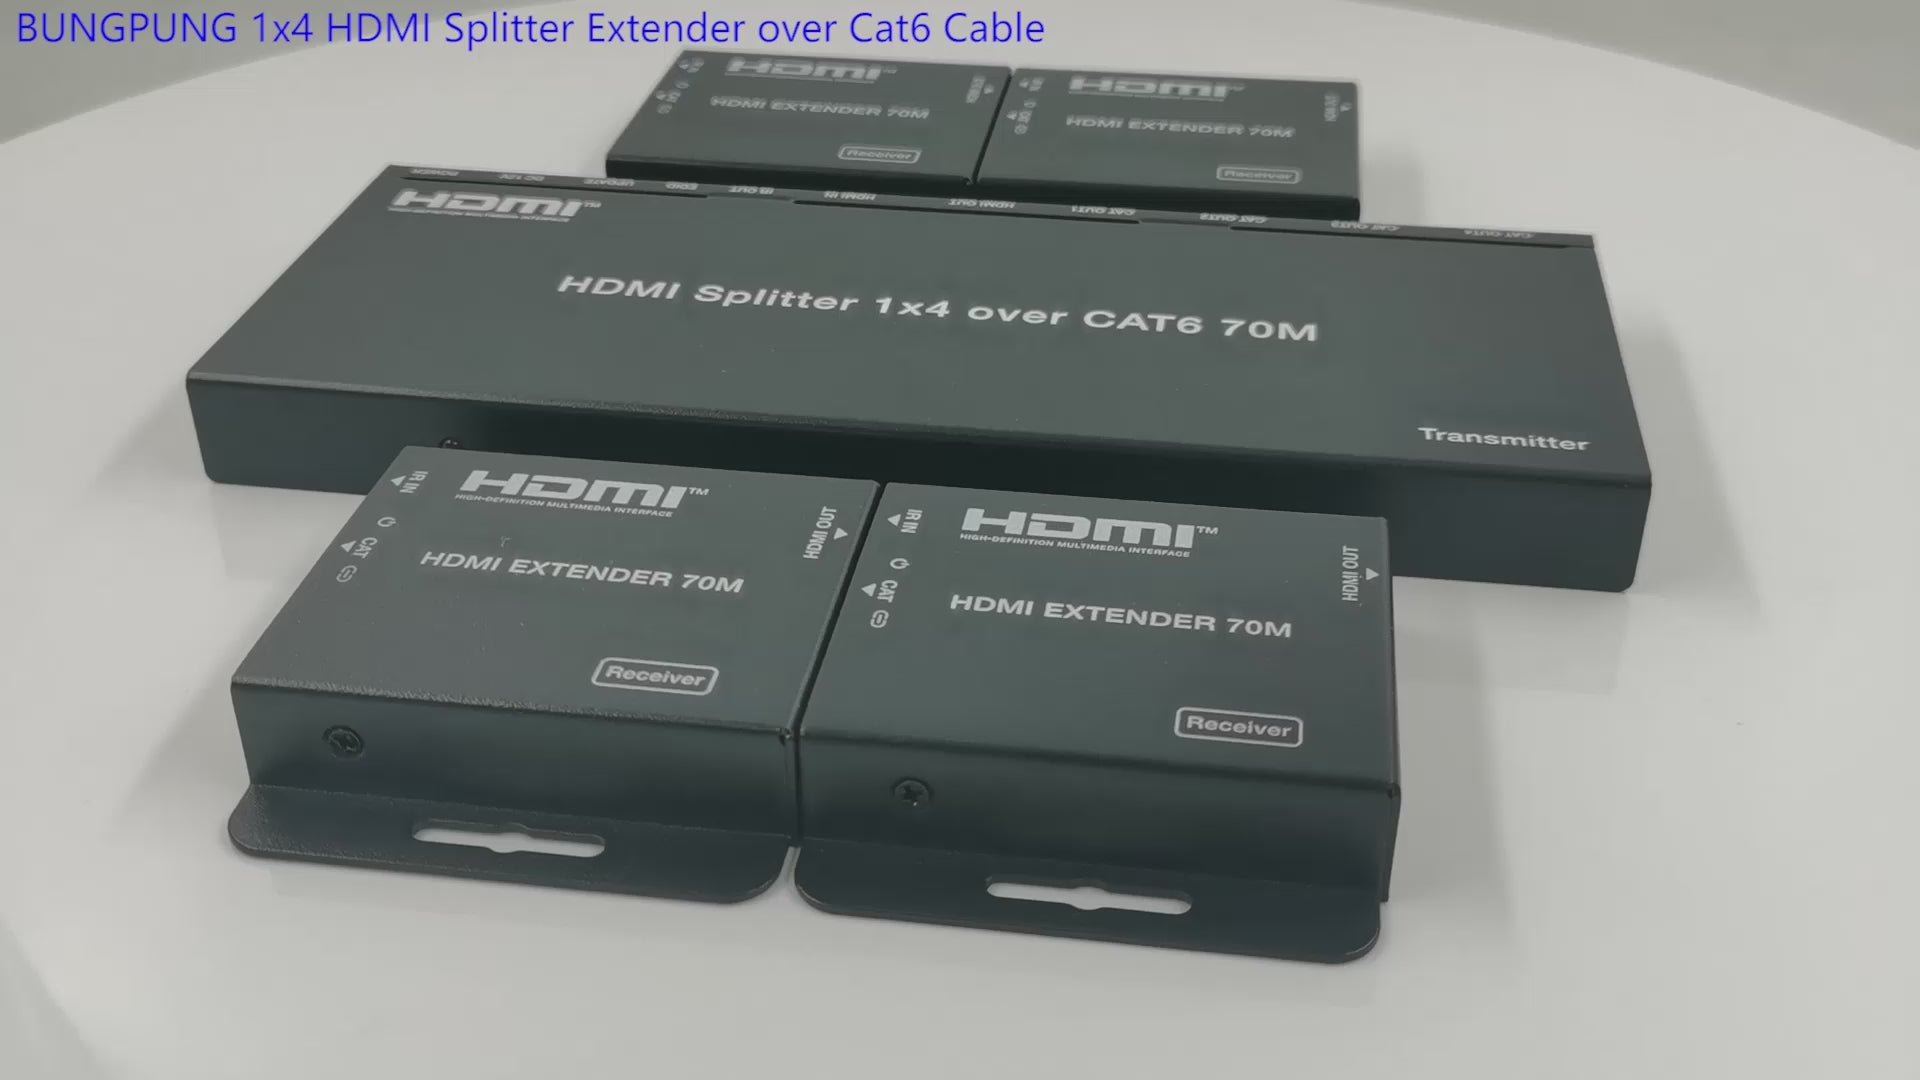 1x4 HDMI Splitter Extender over Cat6/7 Cable video introduction